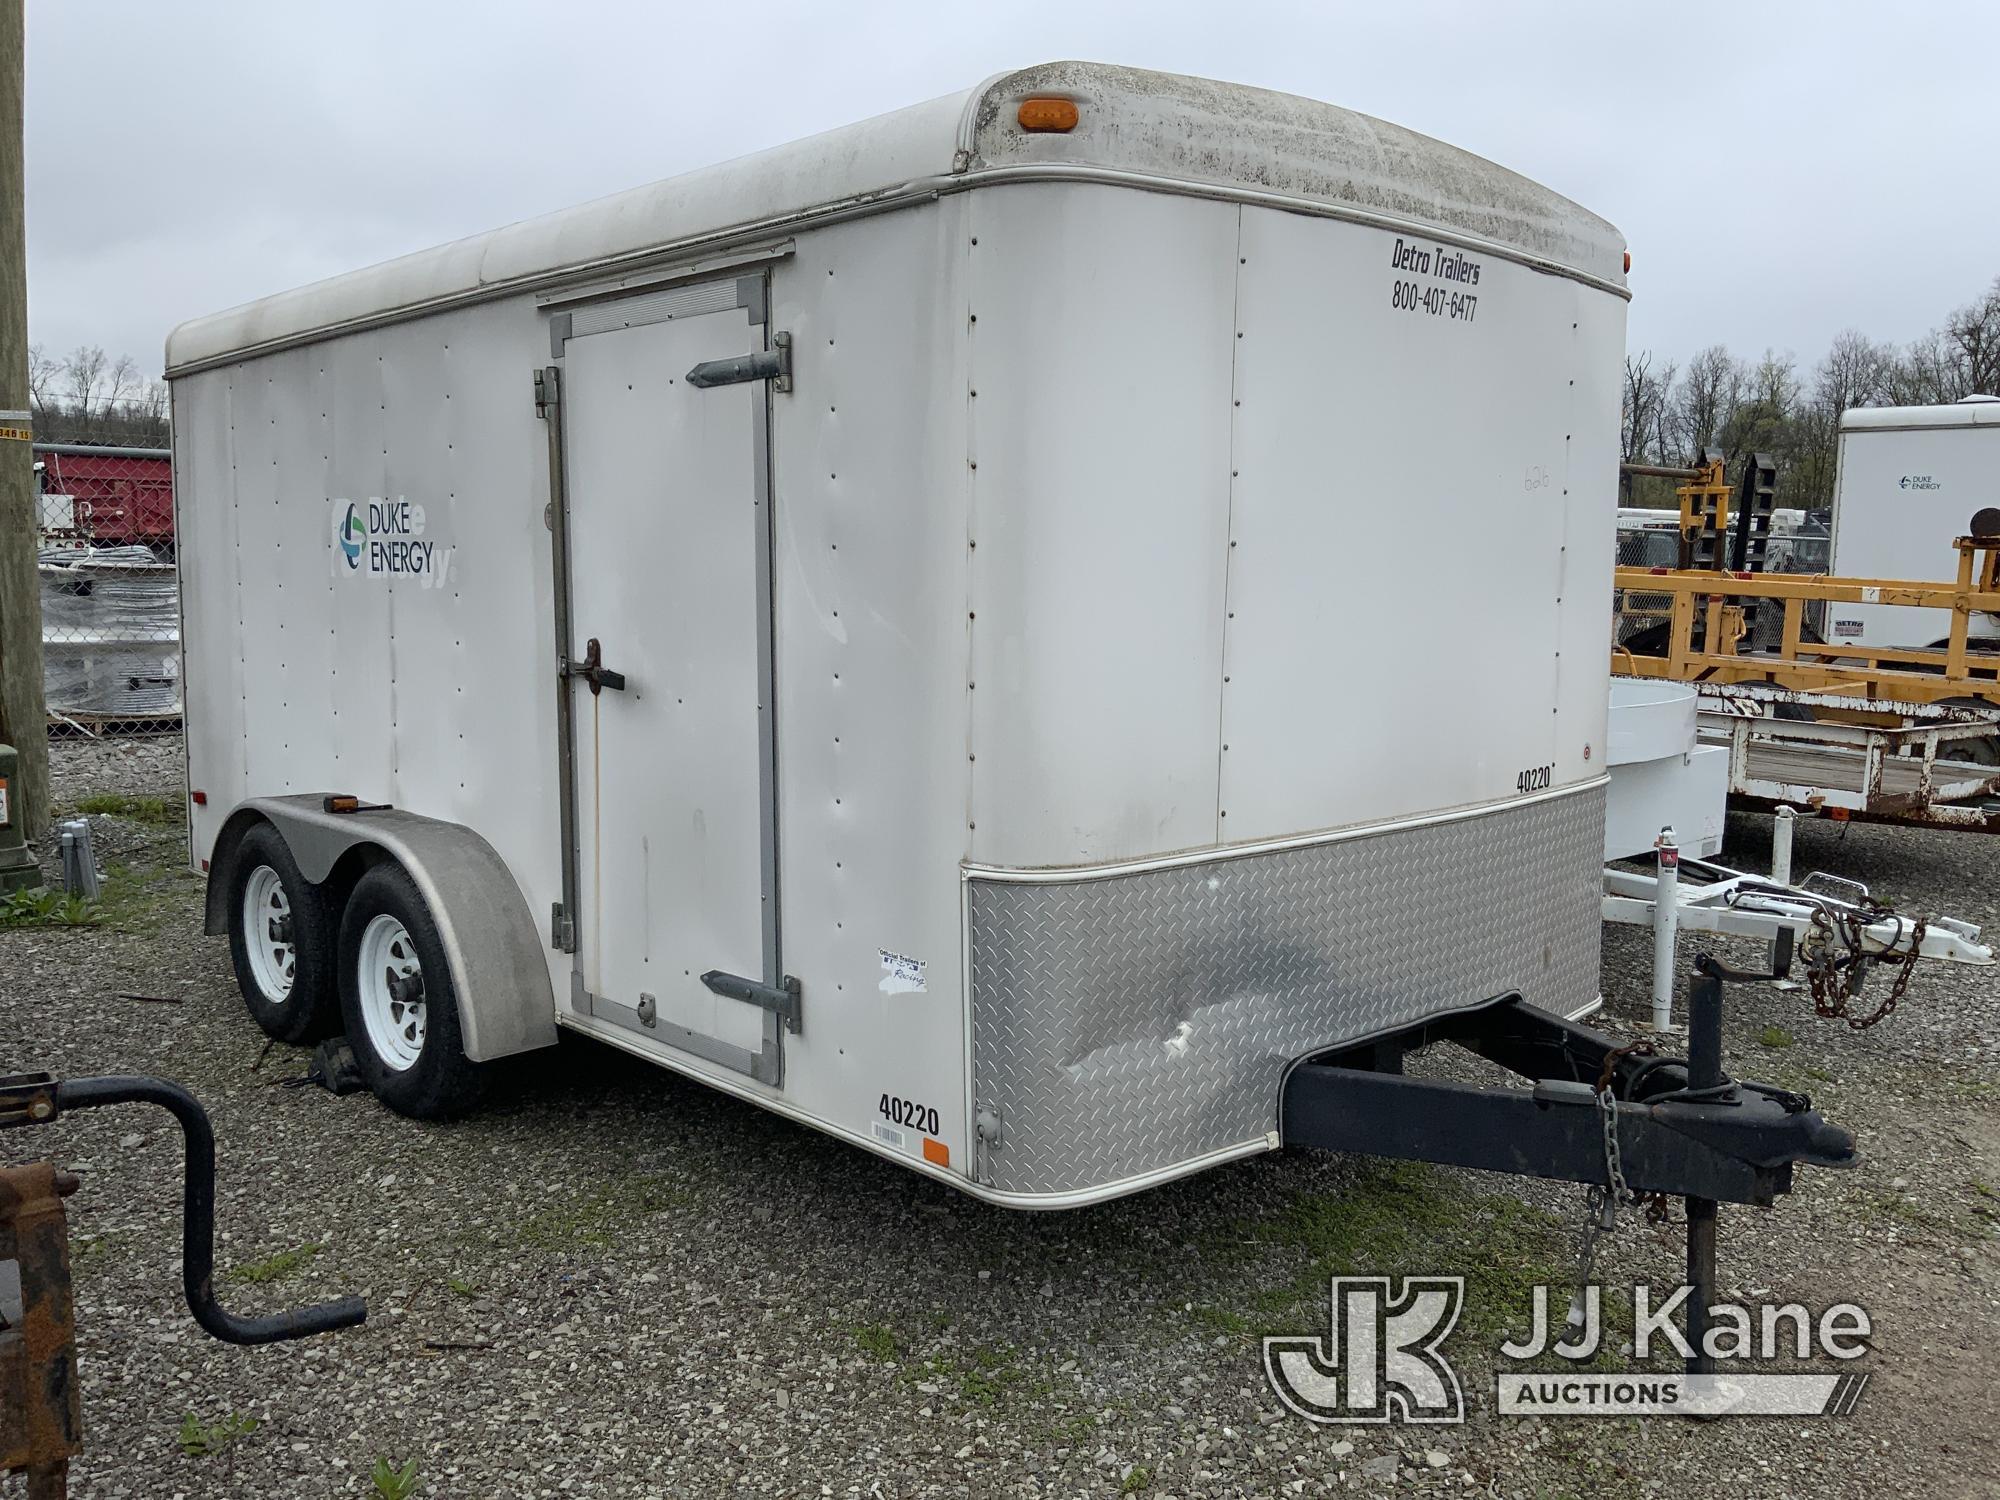 (Verona, KY) 2007 United T/A Enclosed Cargo Trailer Body Damage, Contents Included) (Duke Unit